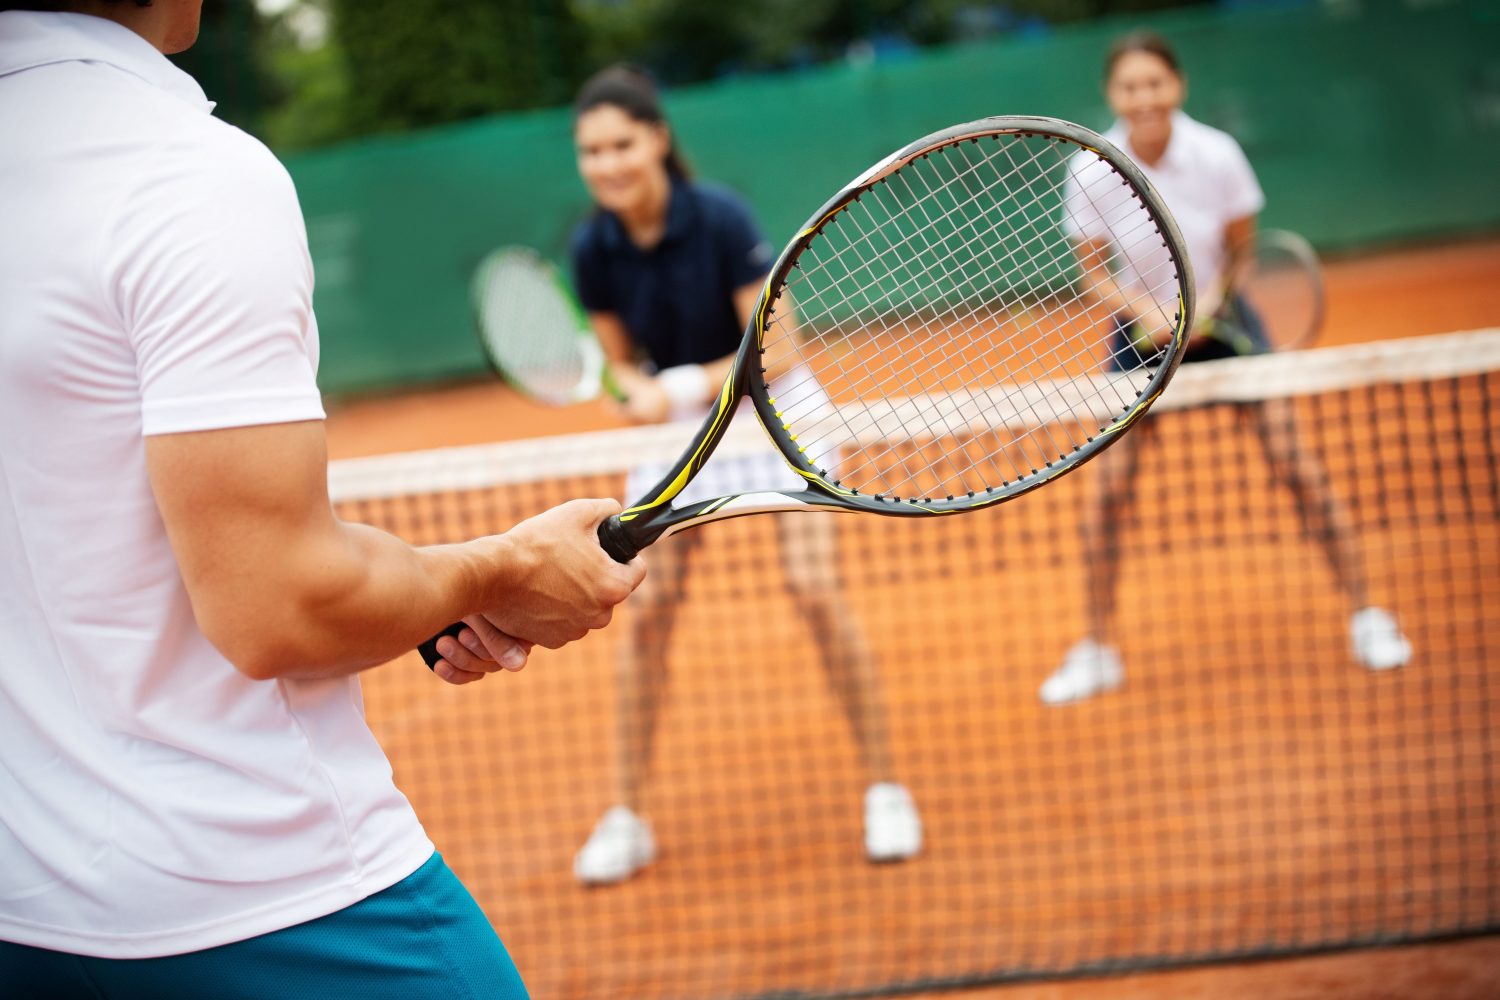 Use Tennis Club Management Software to Manage Your Tennis Club